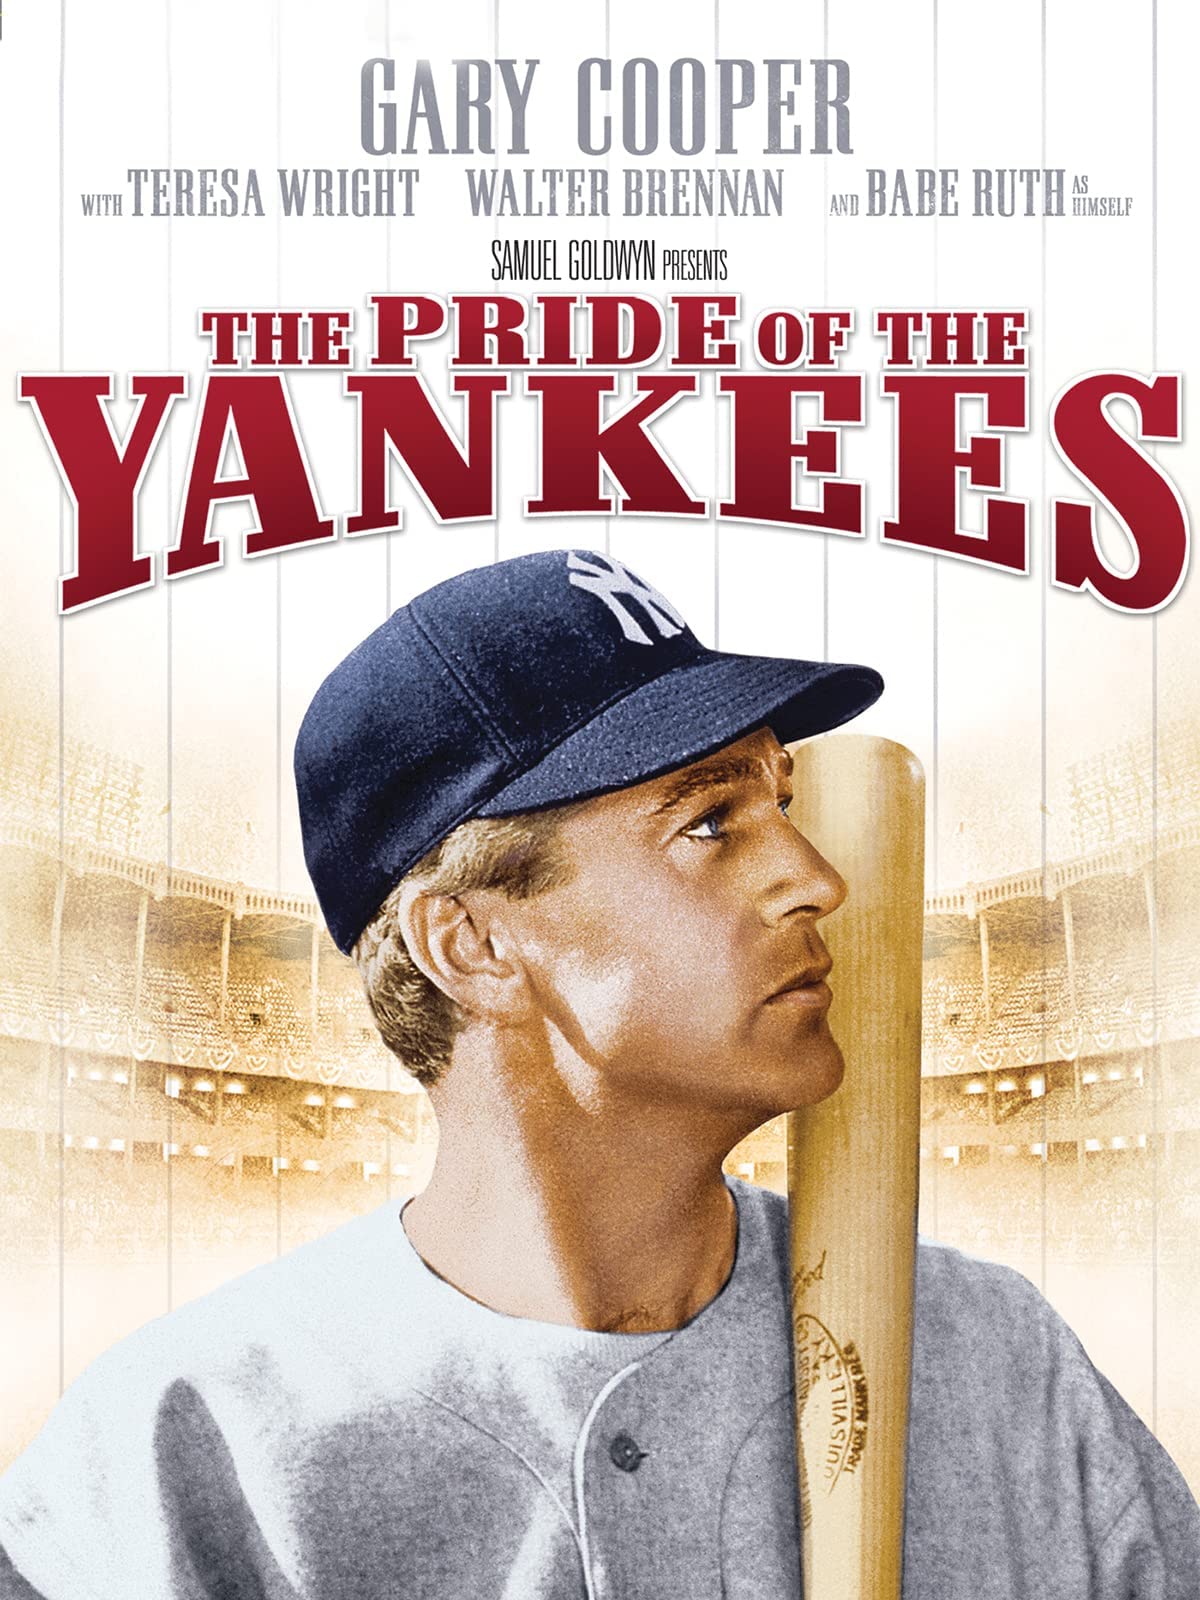 The Pride of the Yankees starring Gary Cooper